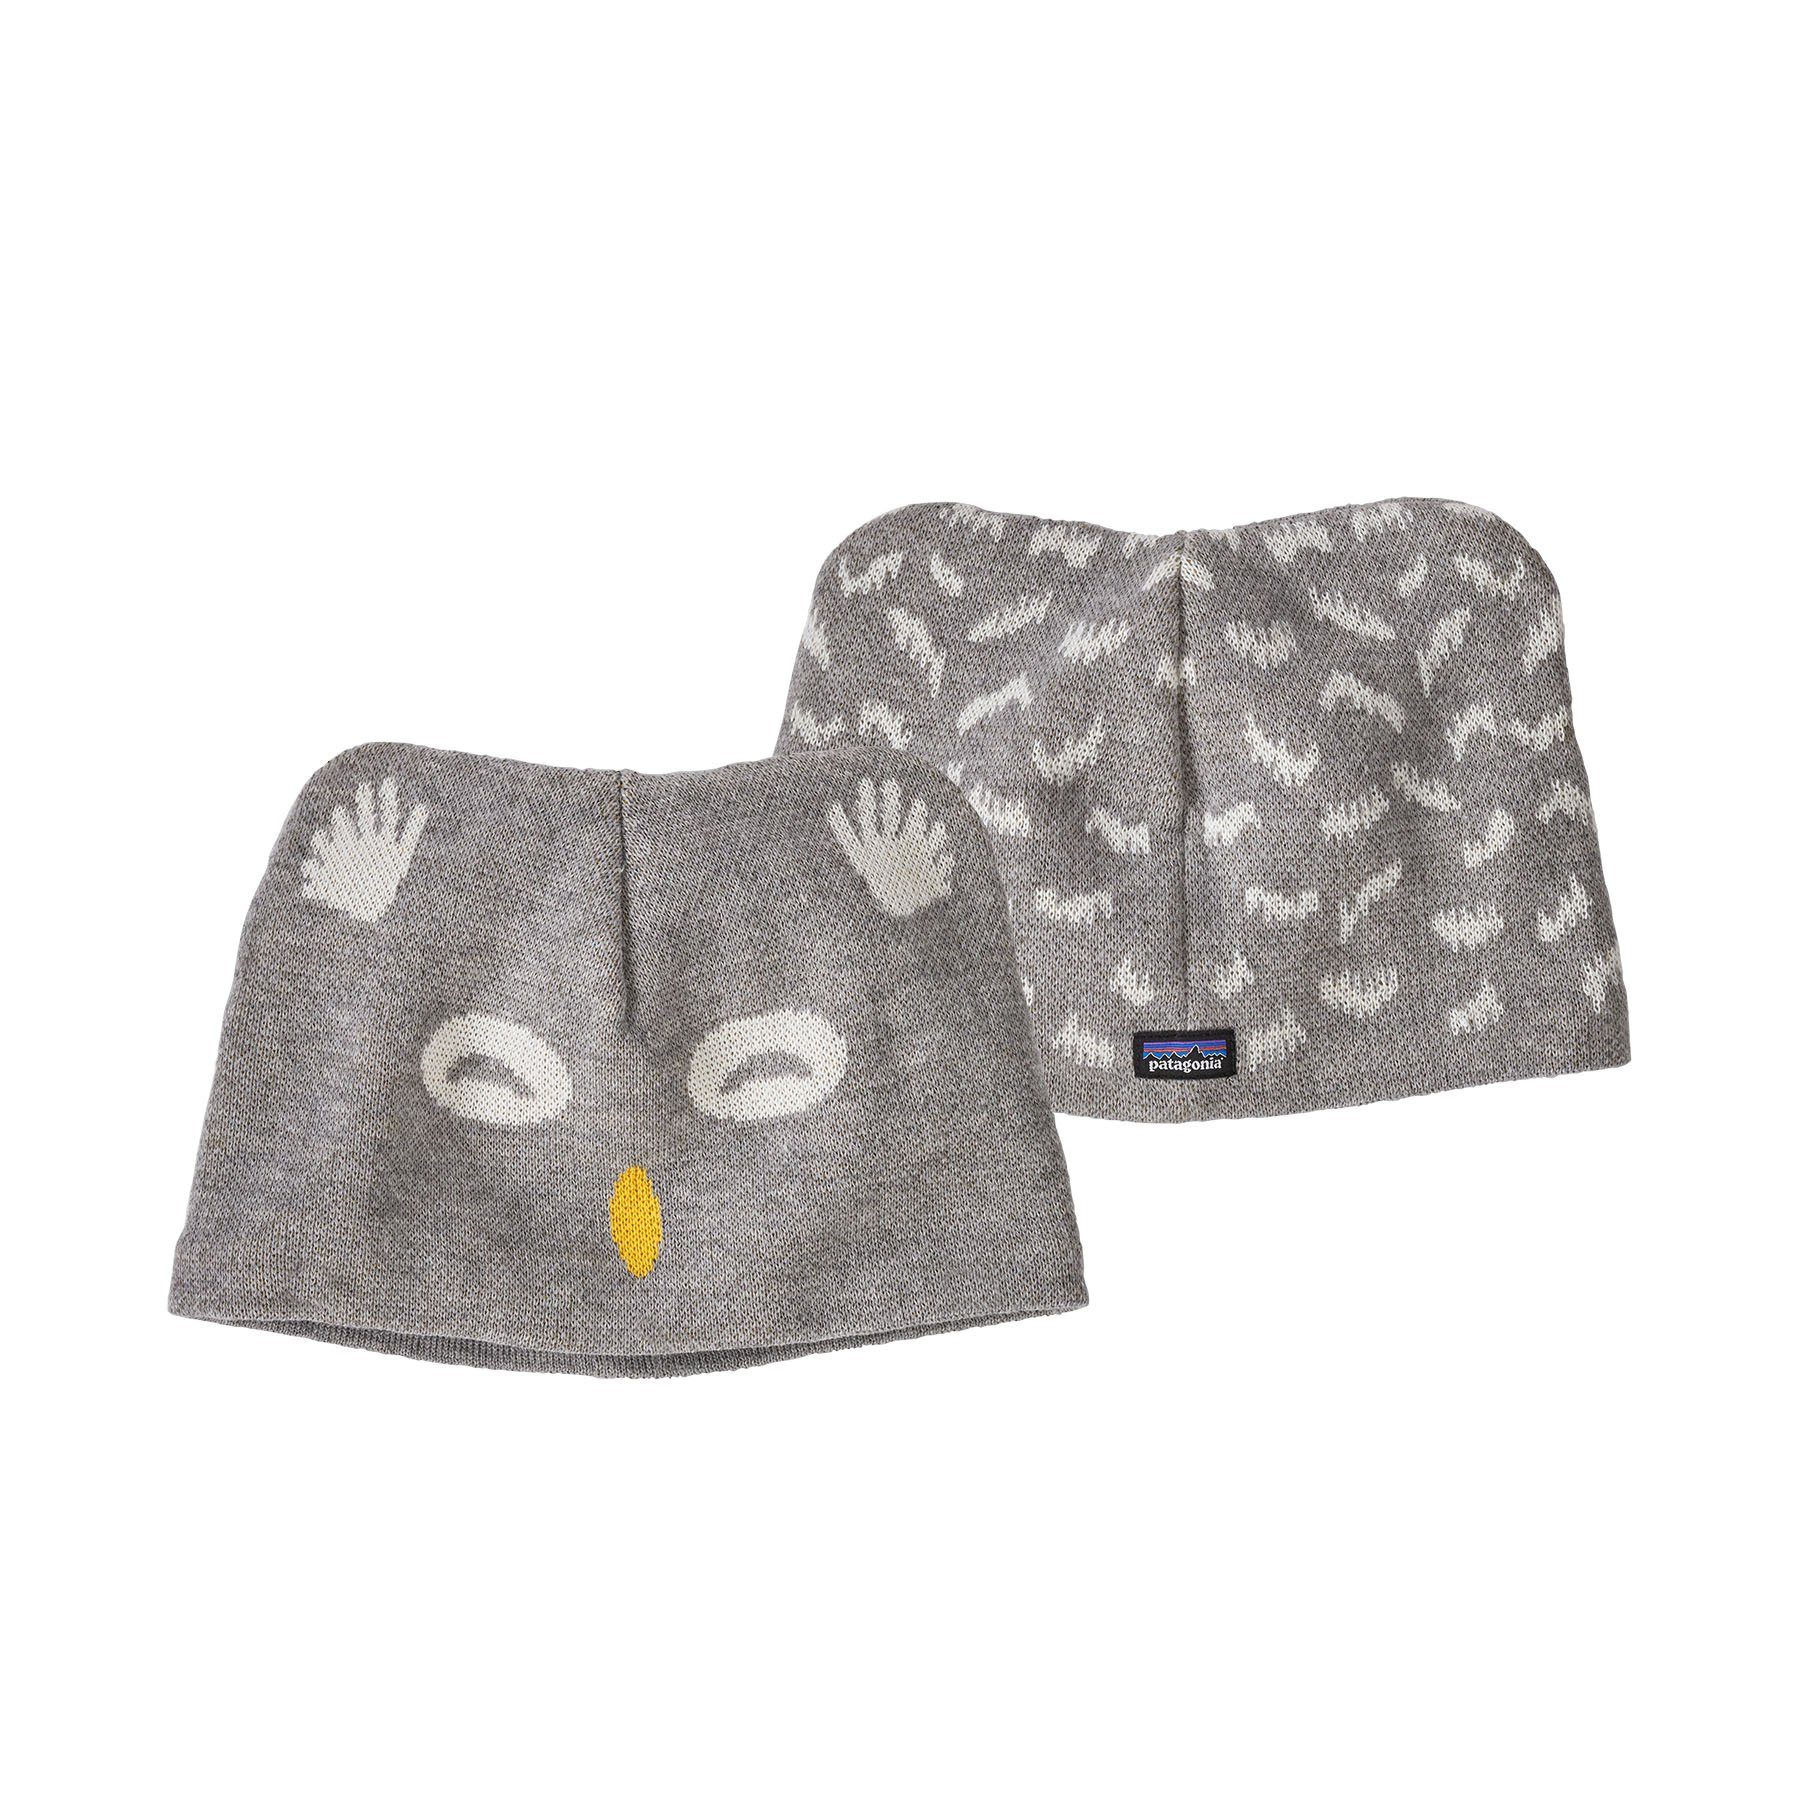 Animal Baby Friends Patagonia owl/drifter Beanie Patagonia grey Beanie beanie Kinder